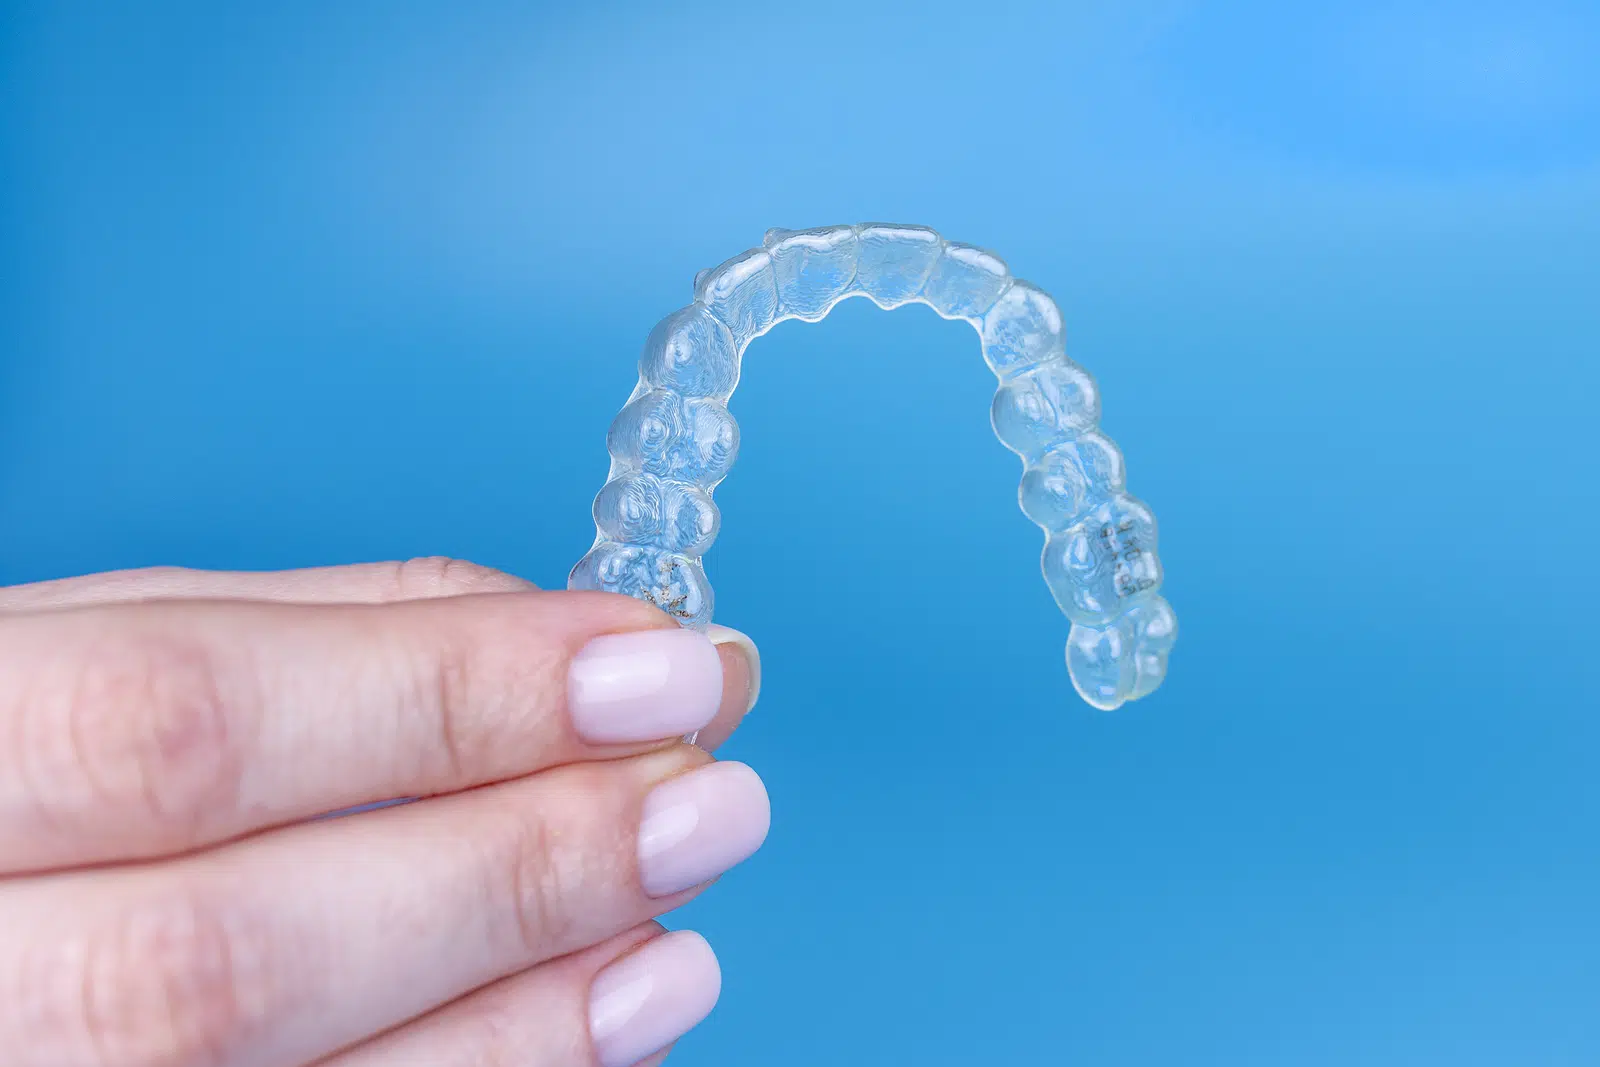 Questions To Ask Your Orthodontist About Invisalign